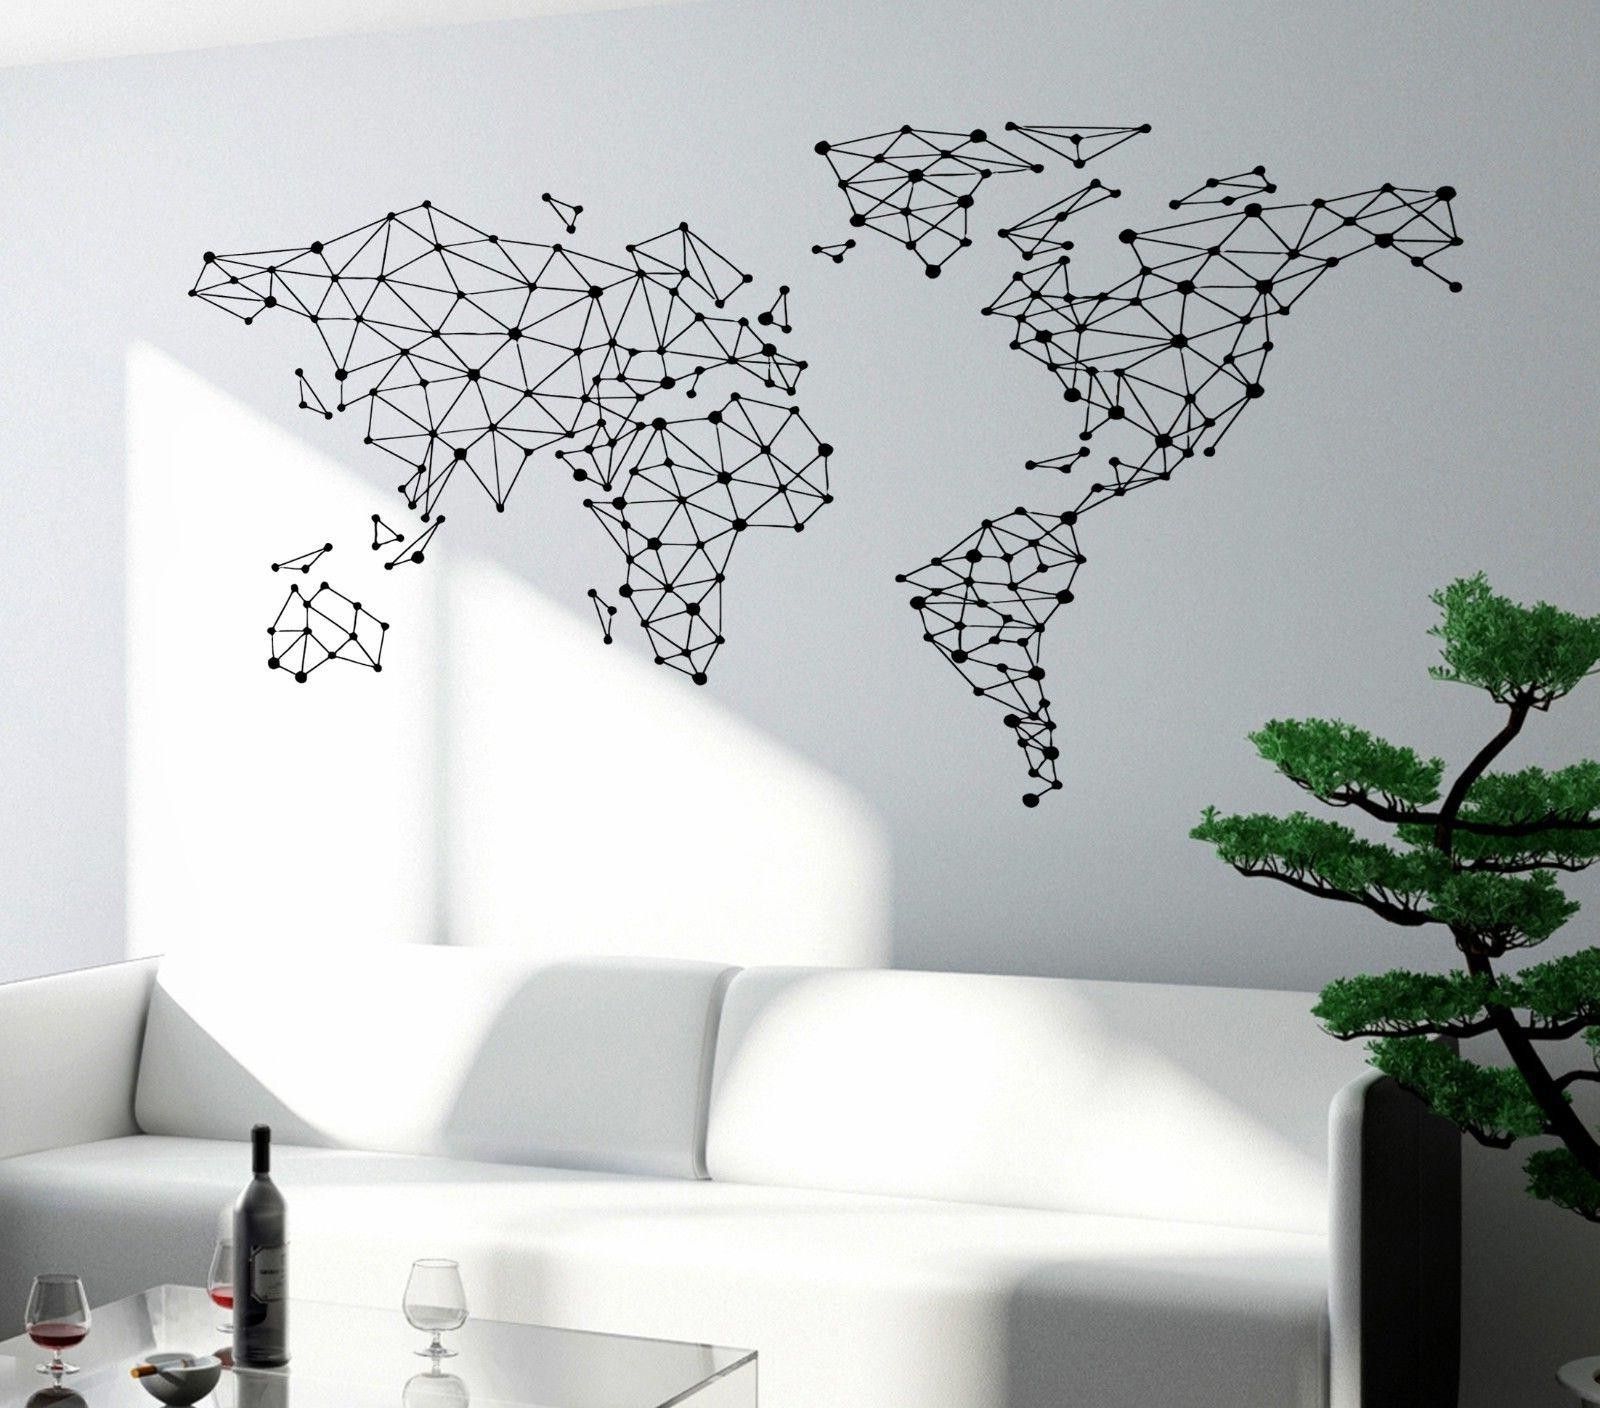 Trendy World Map Wall Art – World Maps Collection With Regard To Cool Map Wall Art (View 12 of 15)